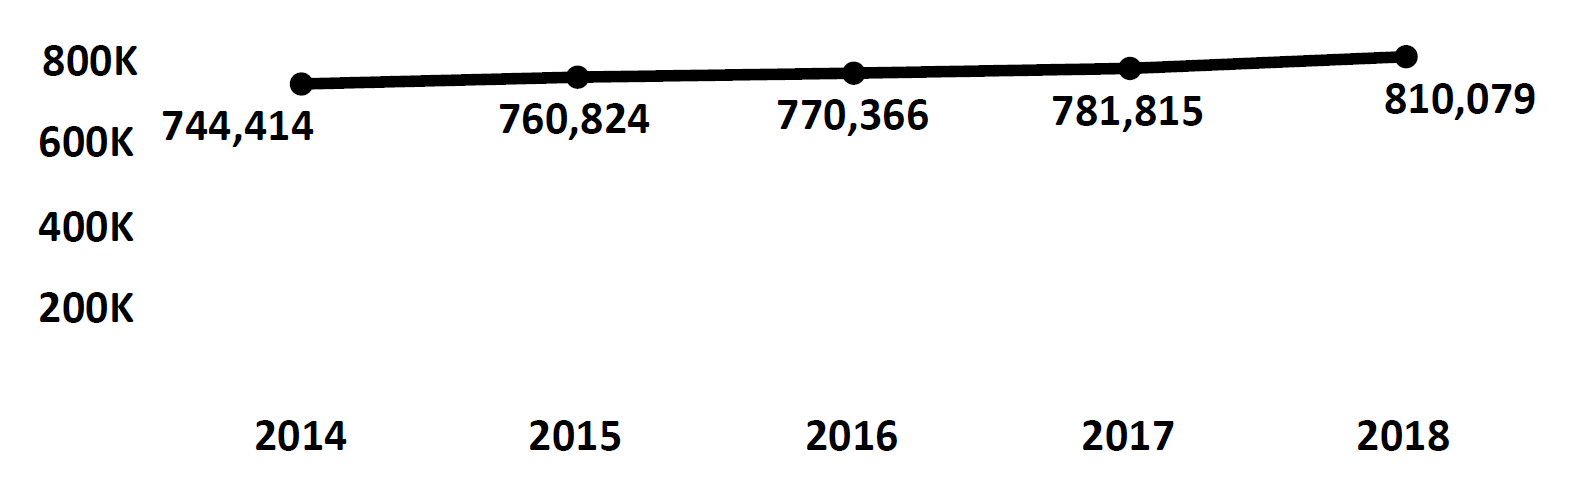 Graph of active Do Not Call registrations in Hawaii each fiscal year from 2014 to 2018. In 2014 there were 744,414 numbers registered, which increased each year. In 2018 there were 810,079 numbers registered.